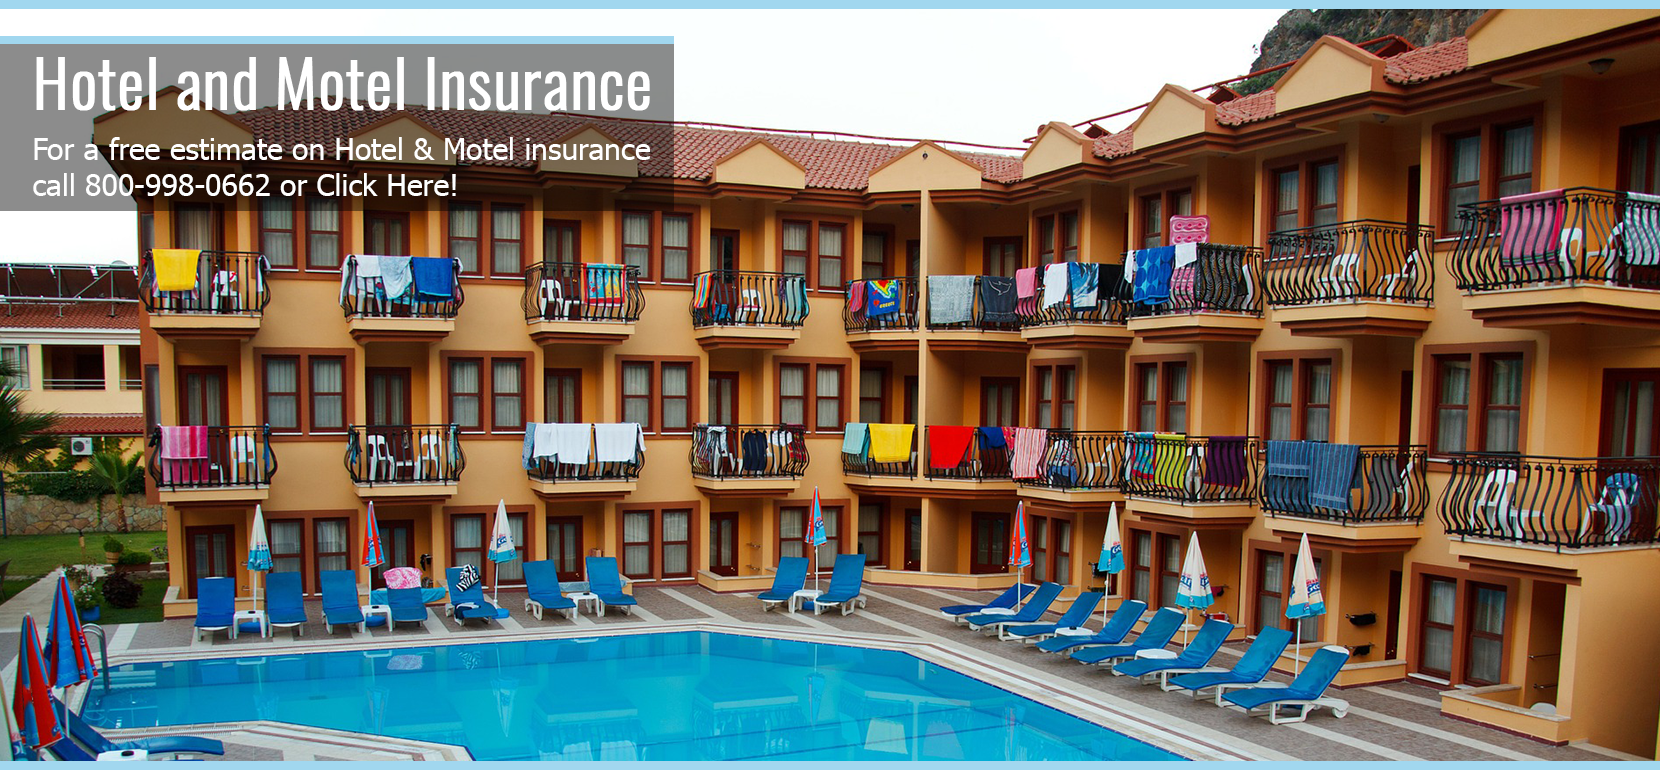 Hotel and Motel Insurance